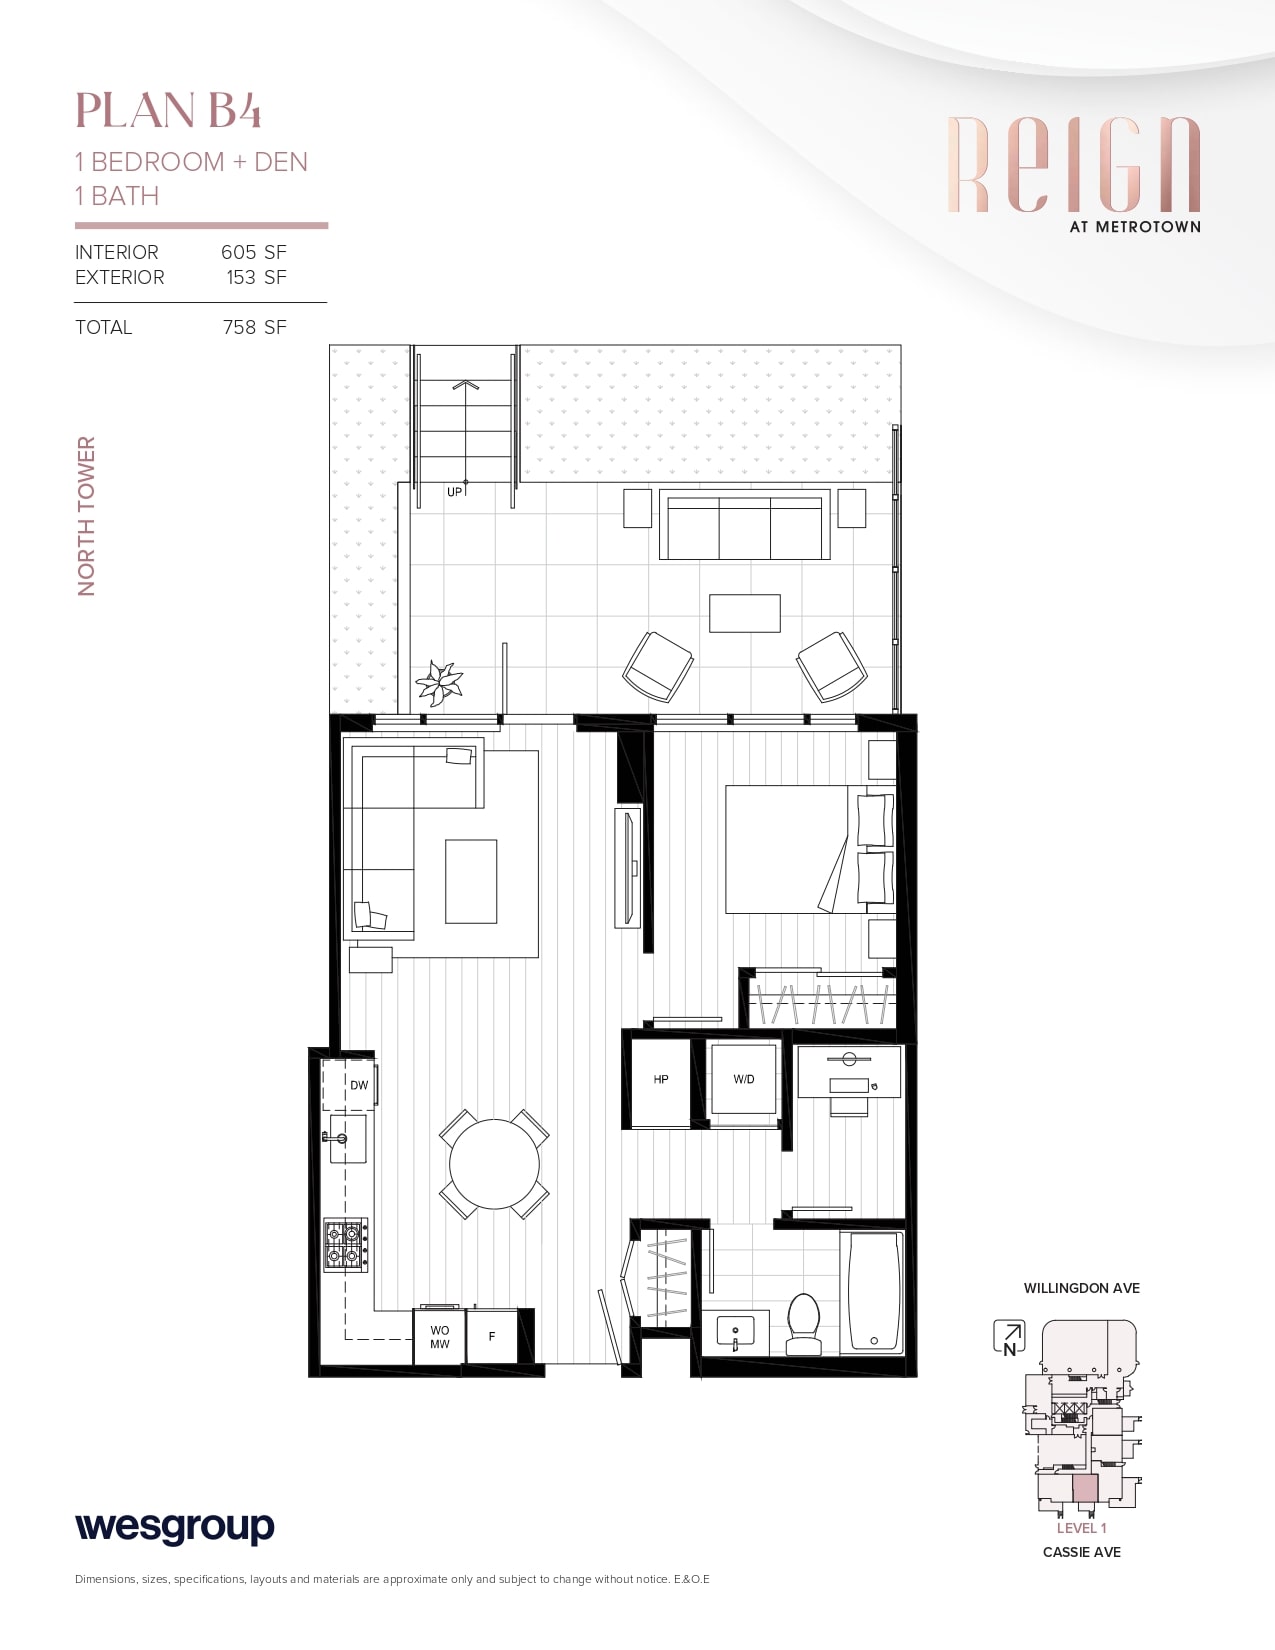 Reign_-_North_Tower_-_Typical_Floorplans_-_FINAL__page-0006-min.jpg